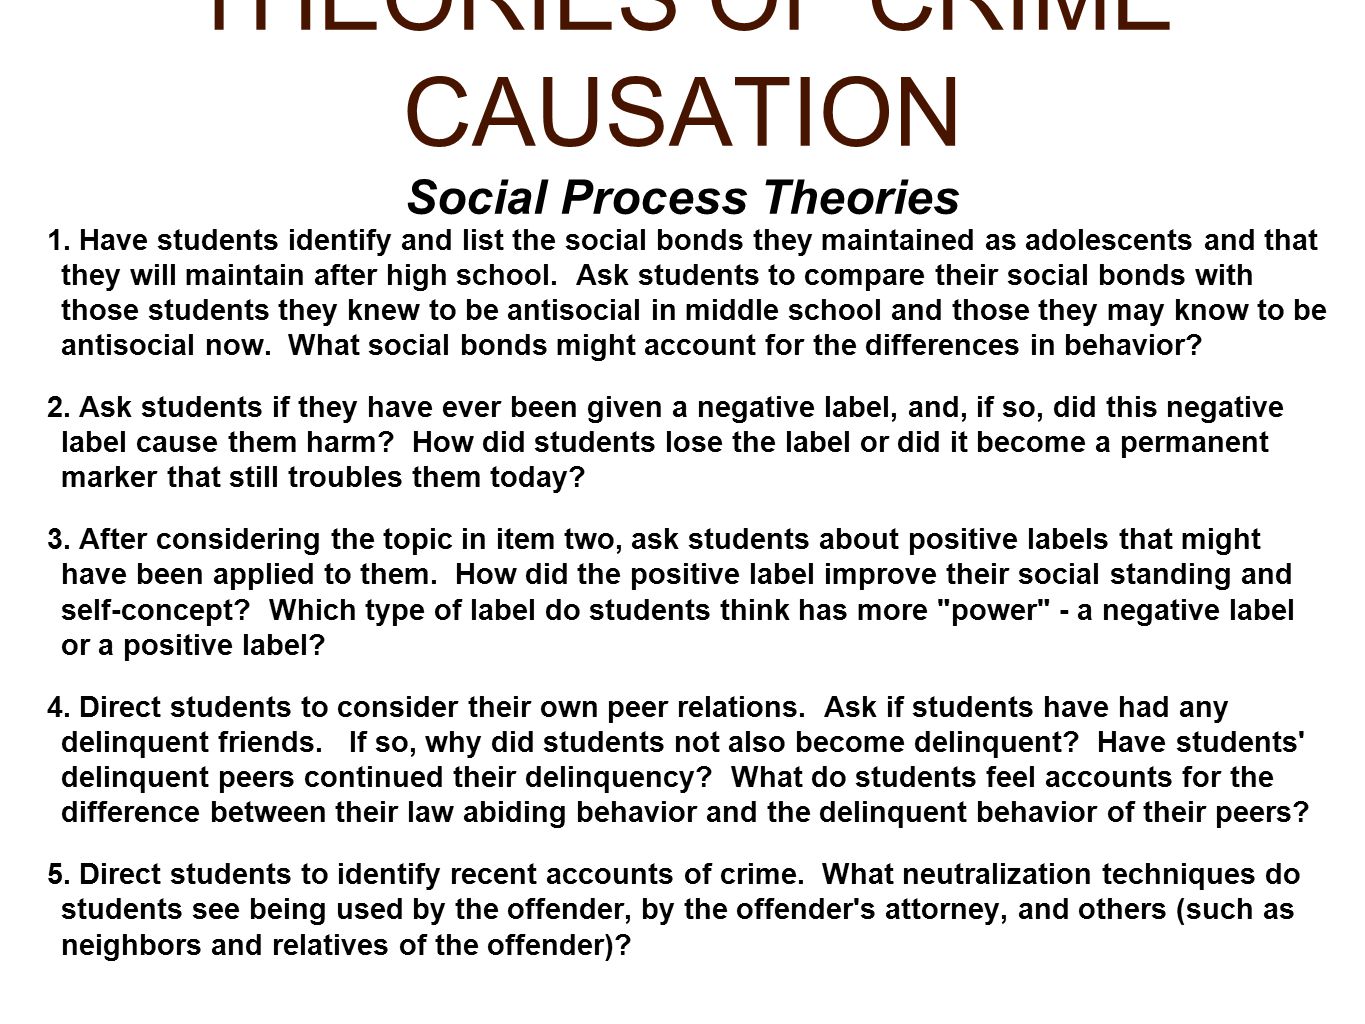 social process theory of crime